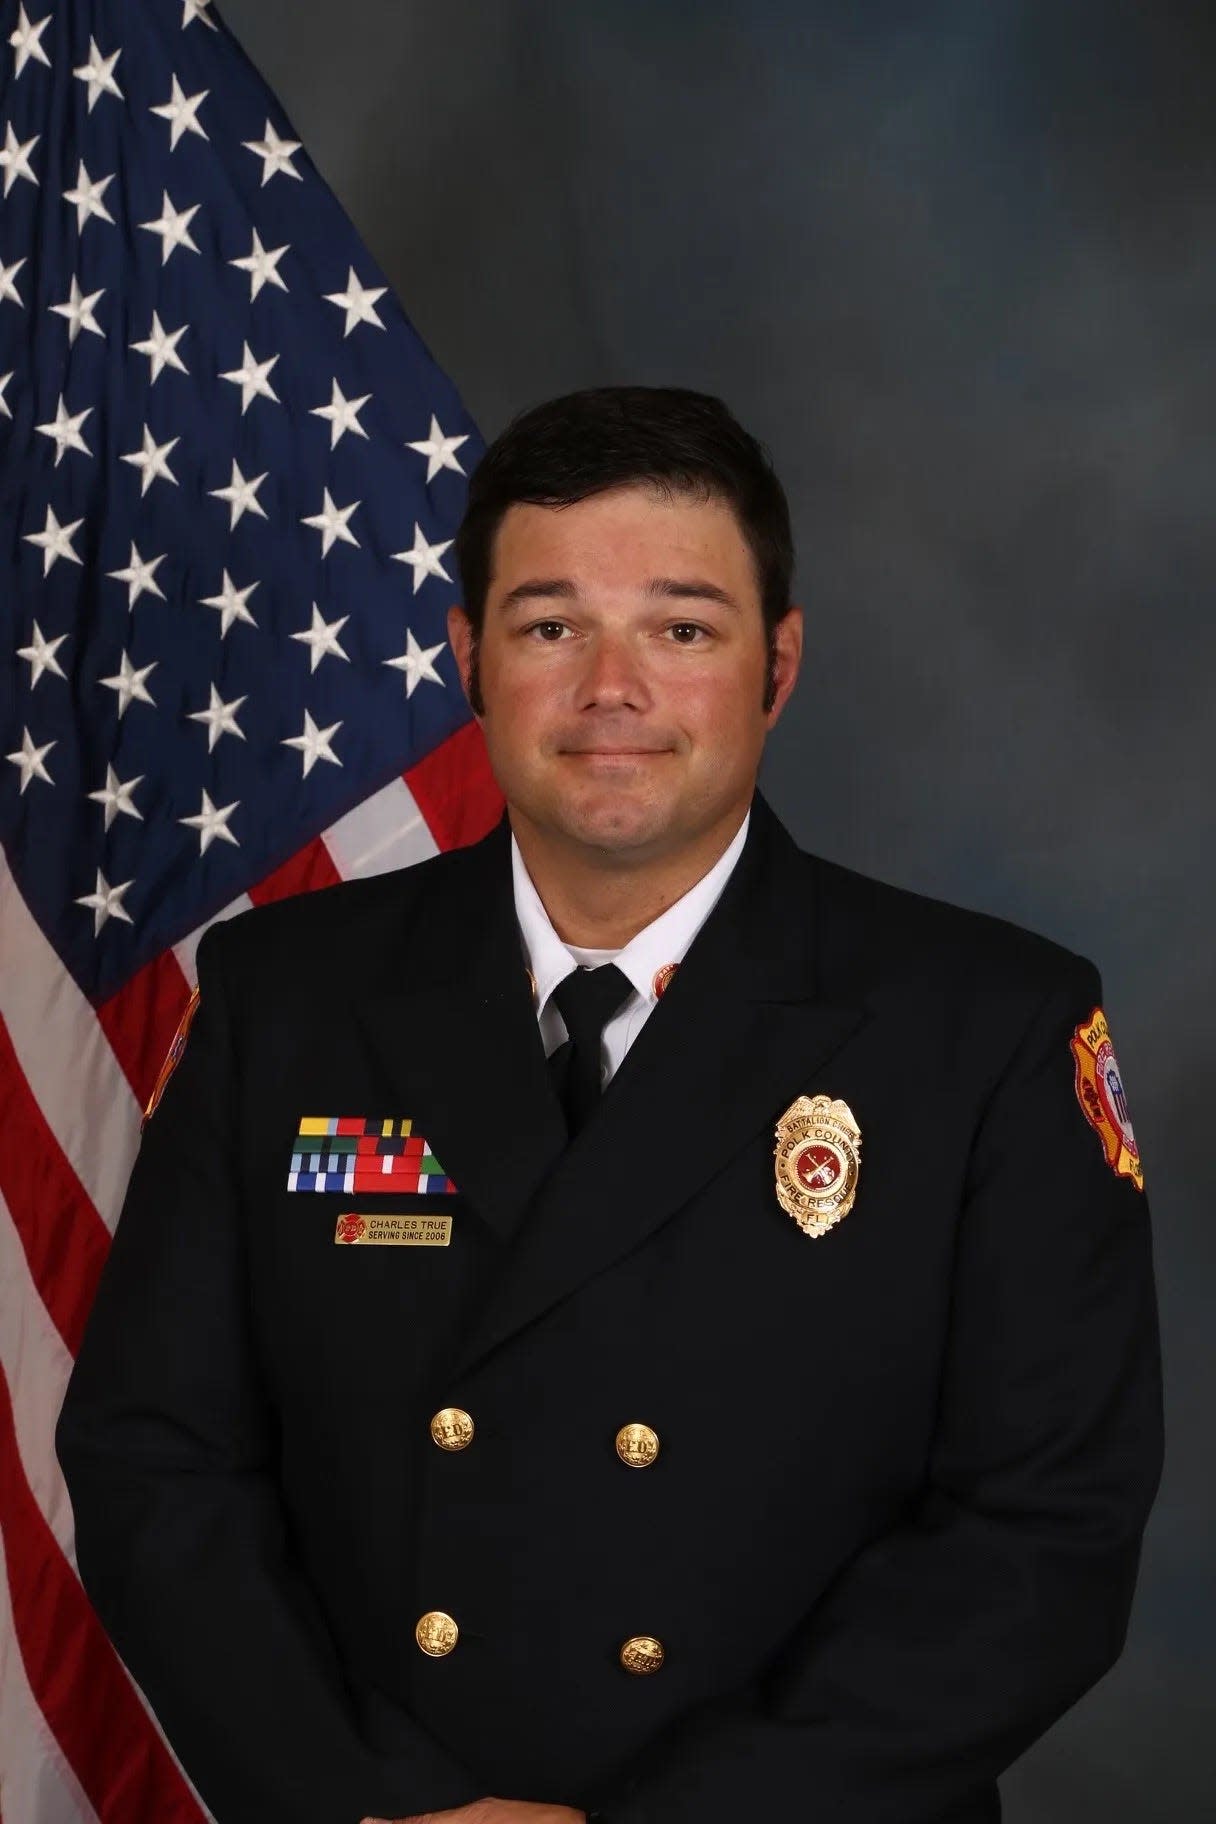 Polk County Fire Battalion Chief Charlie True, who was fired in early January, has been reinstated, according to the fire union.